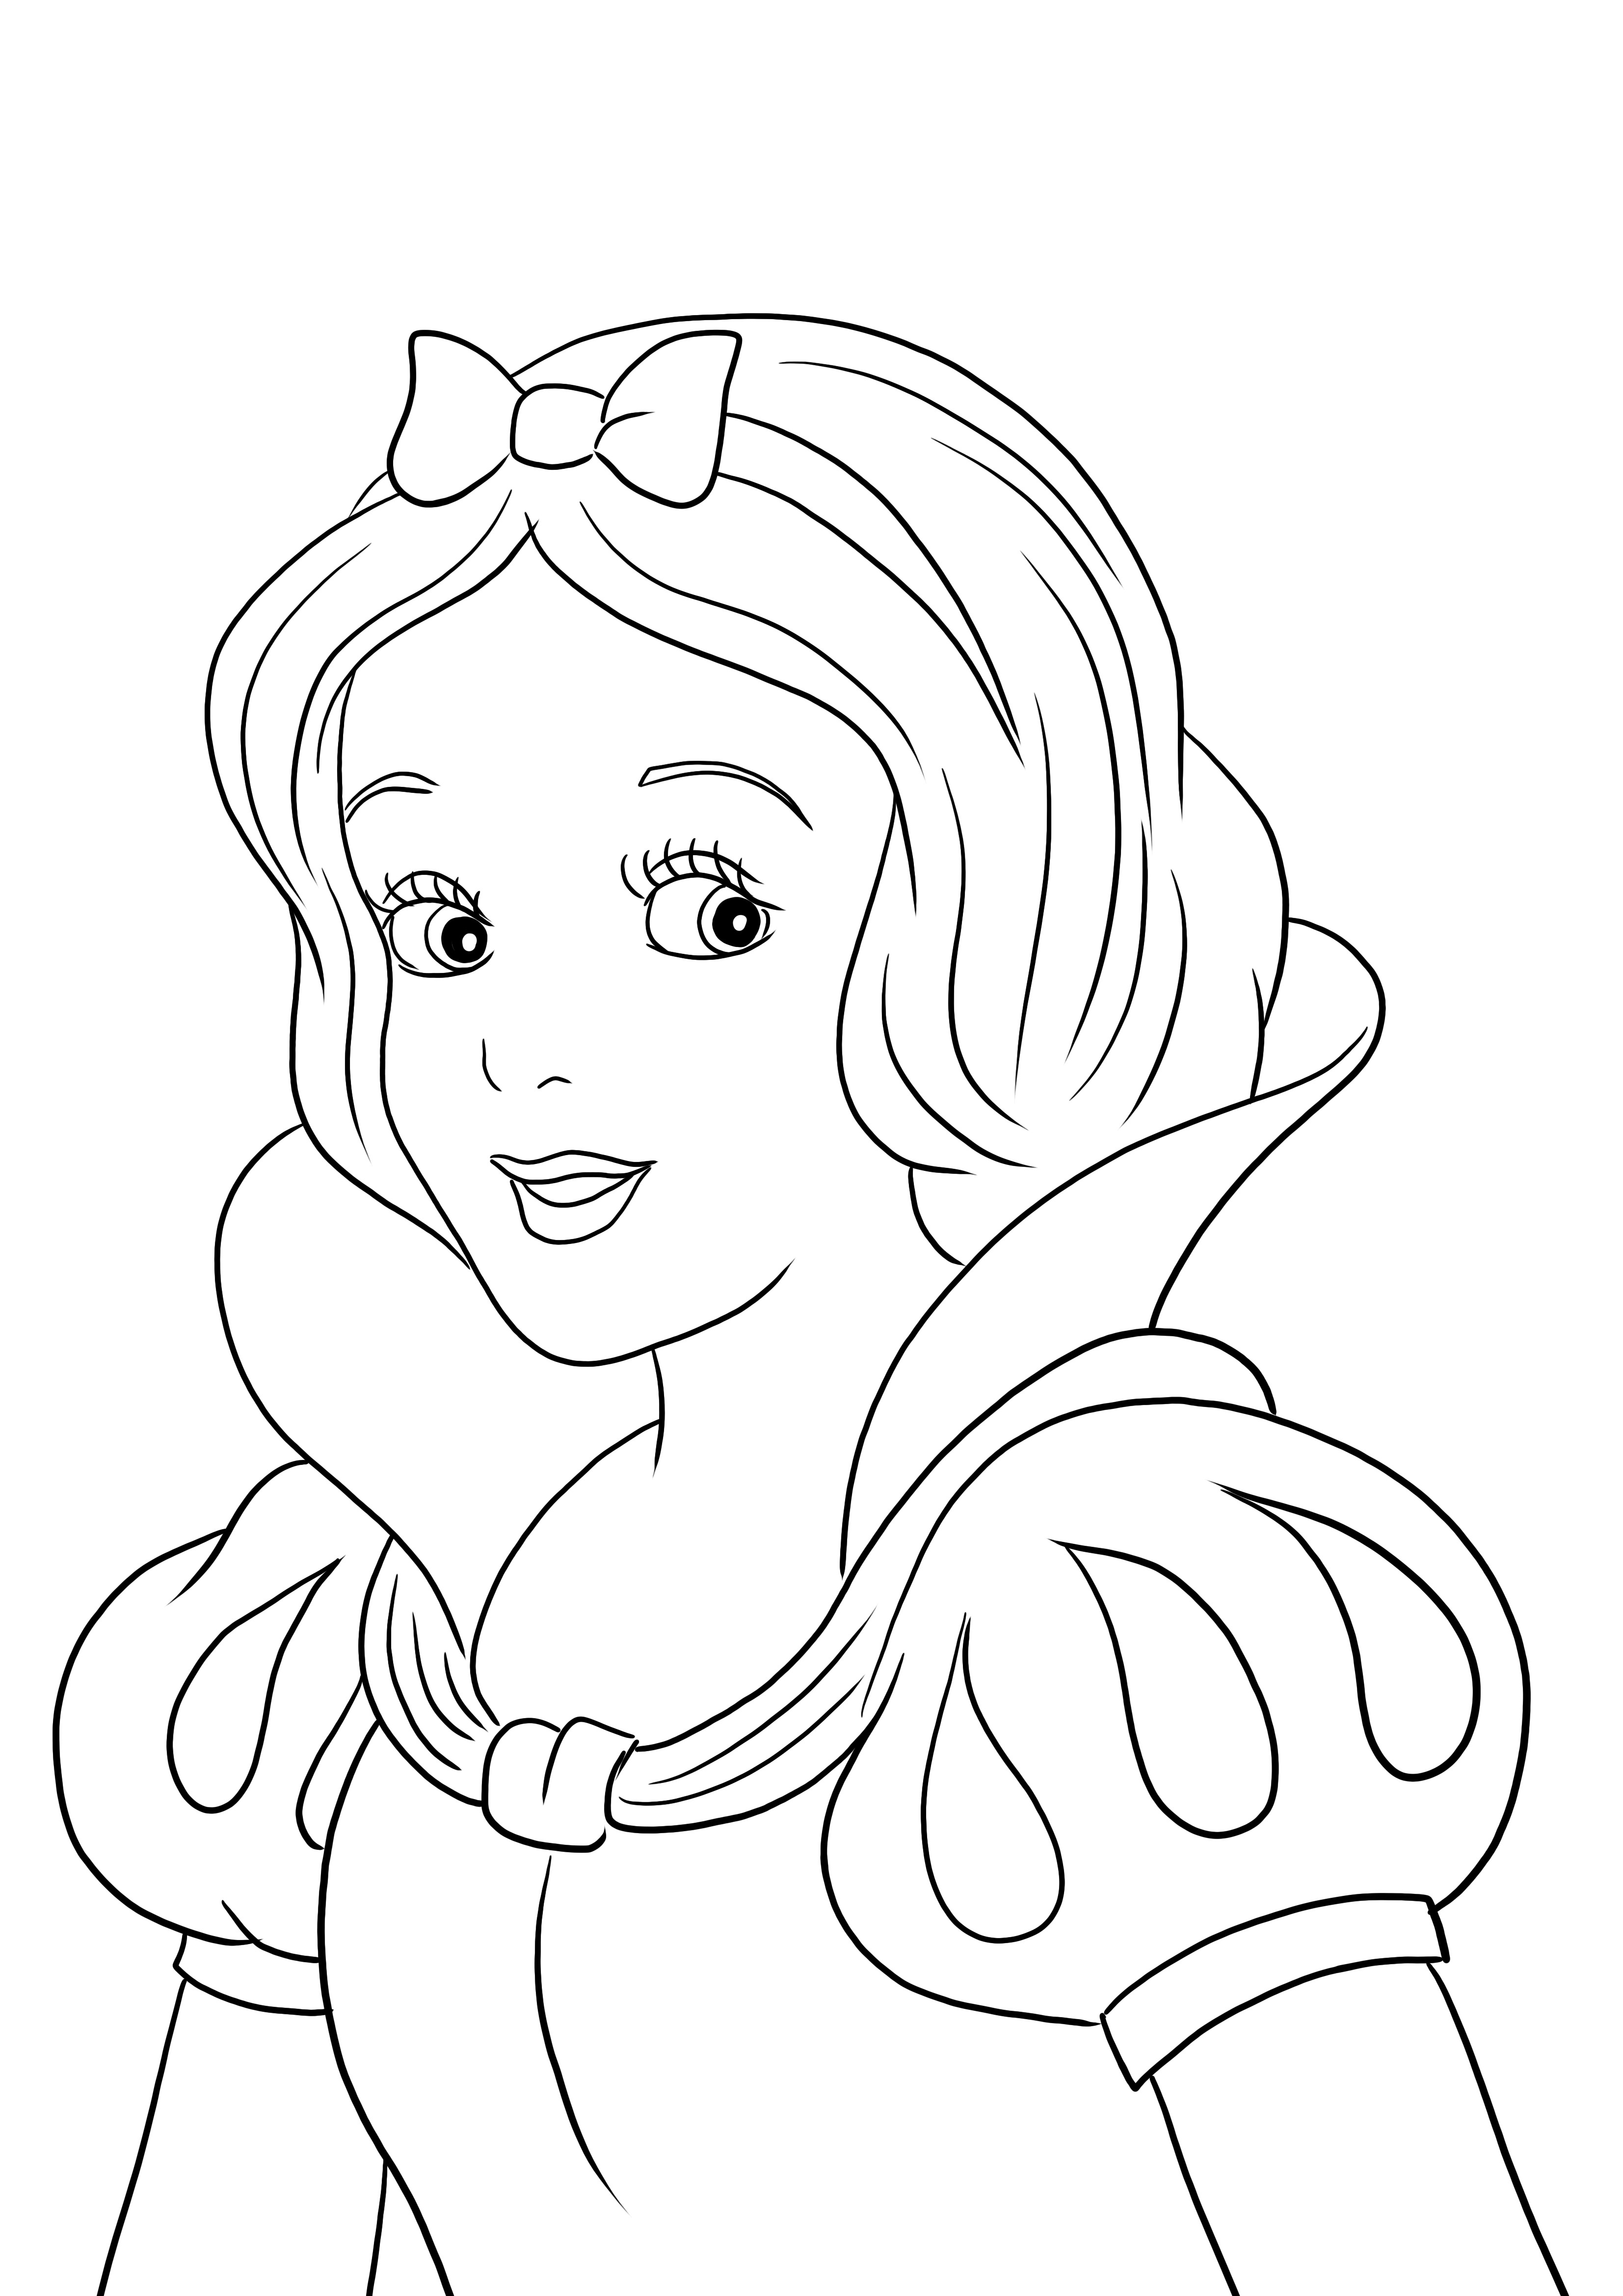 A cute Snow White coloring image-easy and free to print for kids to color